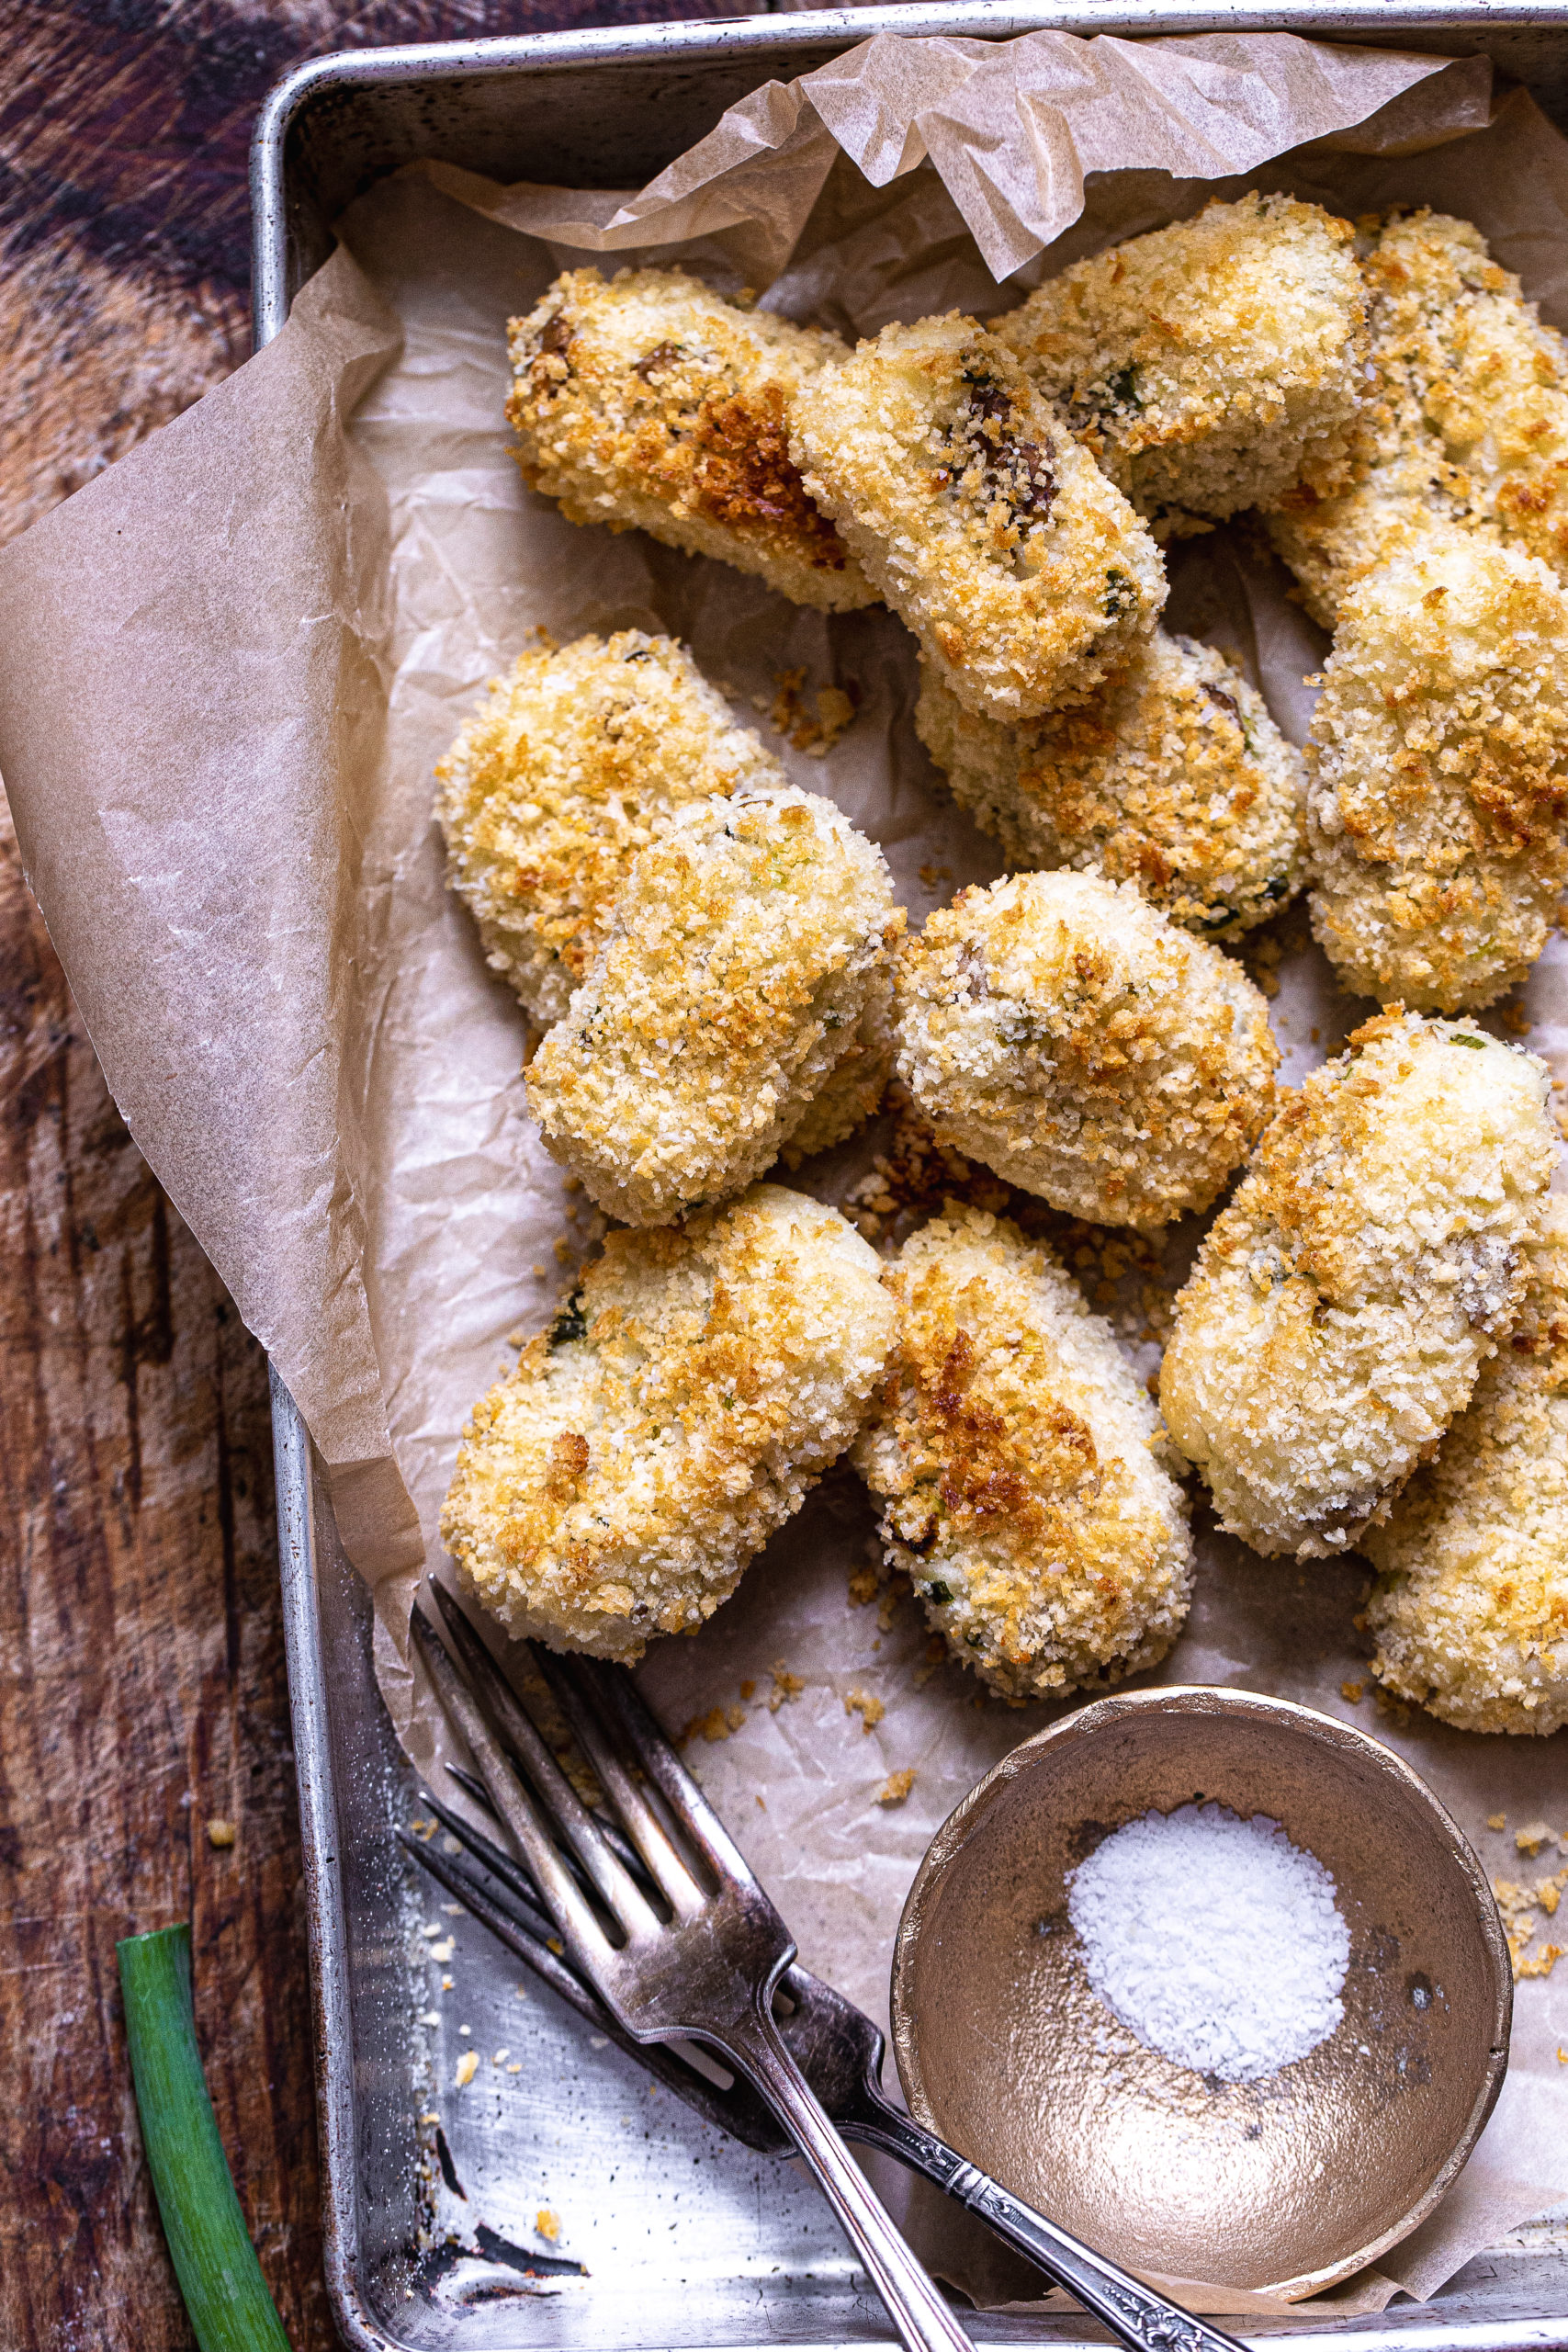 Baked Tater Tots